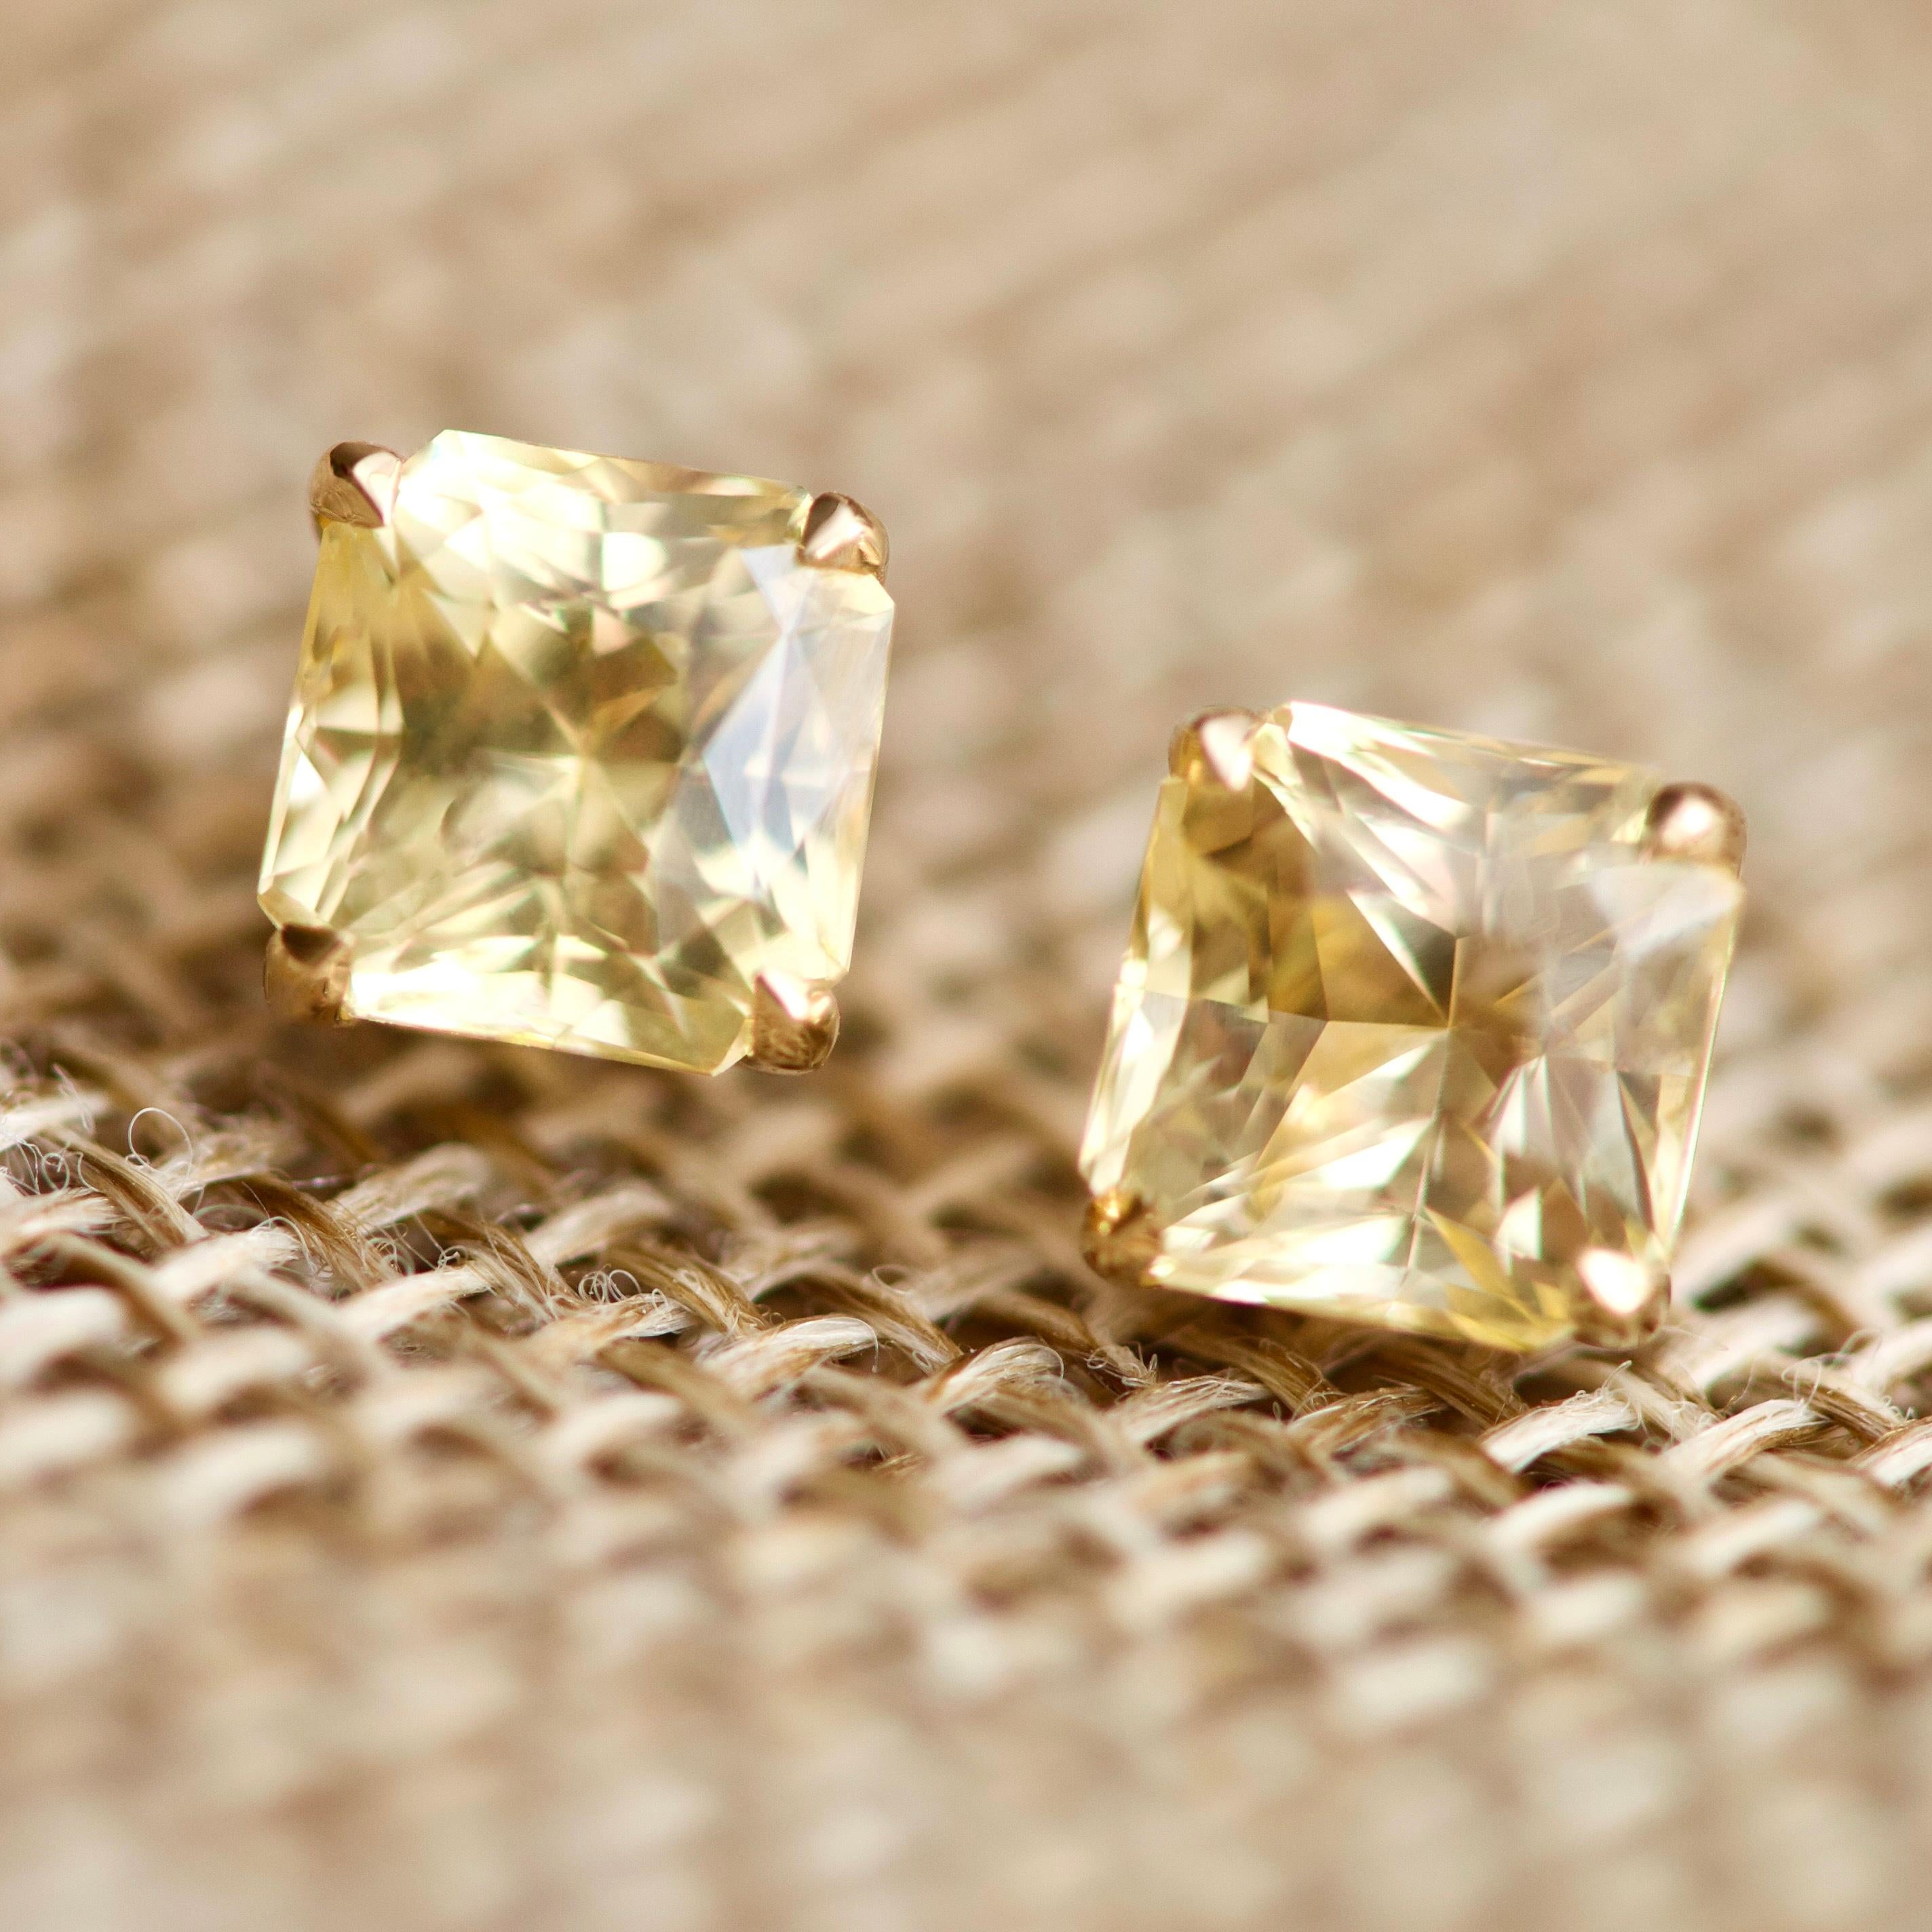 We have a wonderful option for those who wants everything at once - stud earrings with natural yellow sapphires. 
Sapphires in these earrings have very nice warm yellow shade that is similar to the shade of yellow diamonds  The stones have an